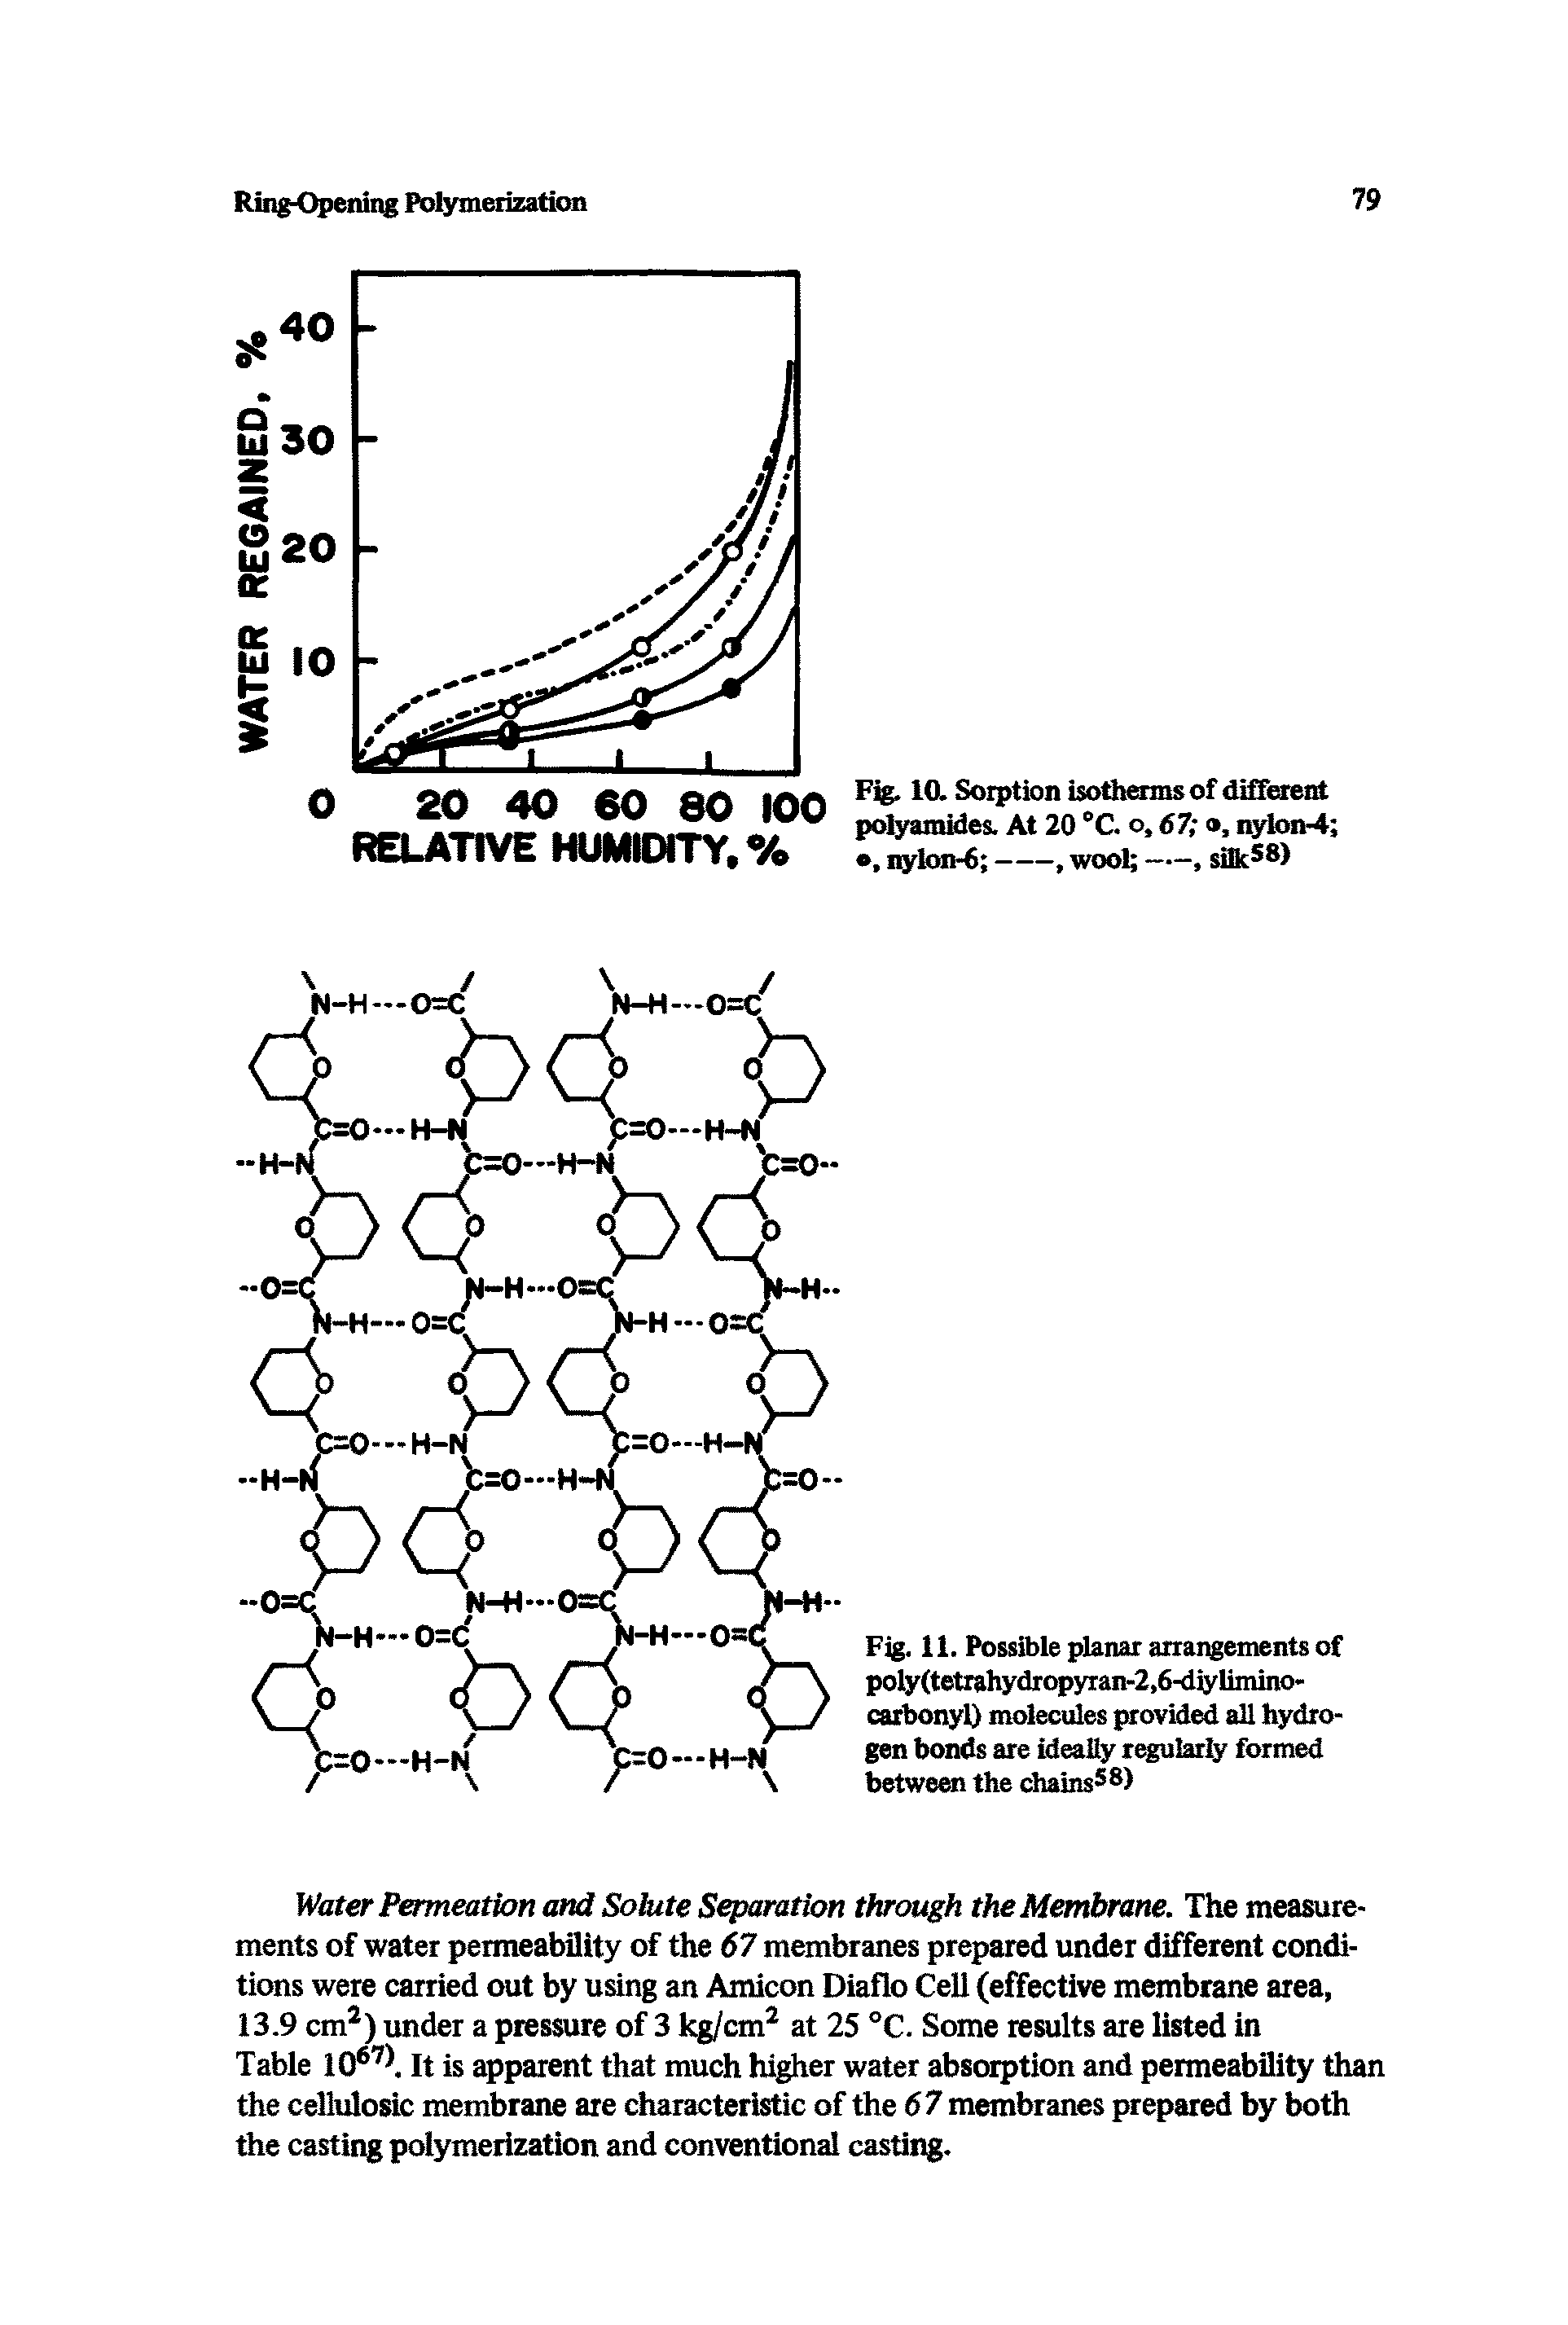 Fig. 10. Sorption isotherms of different polyamides. At 20 °C. o, 67 , nylon-4 o. nylon-6 ----, wool ----, silk58)...